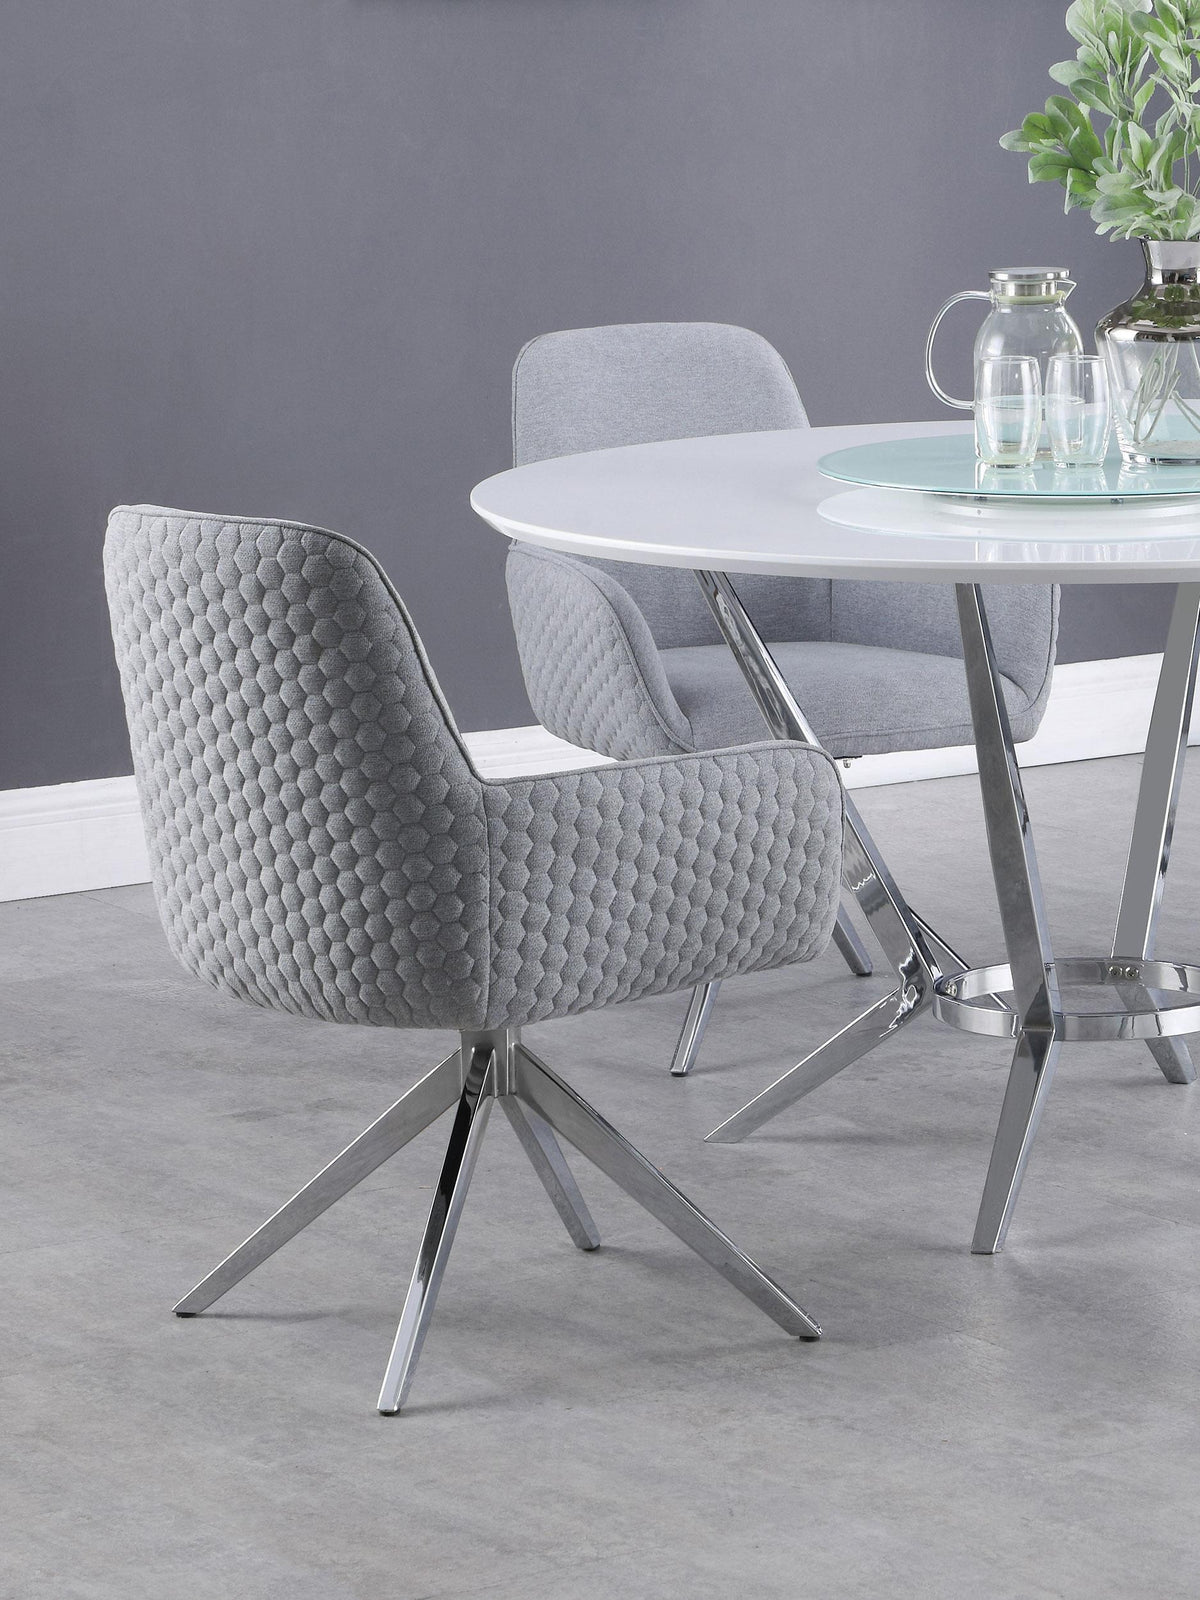 Abby Flare Arm Side Chair Light Grey and Chrome Abby Flare Arm Side Chair Light Grey and Chrome 